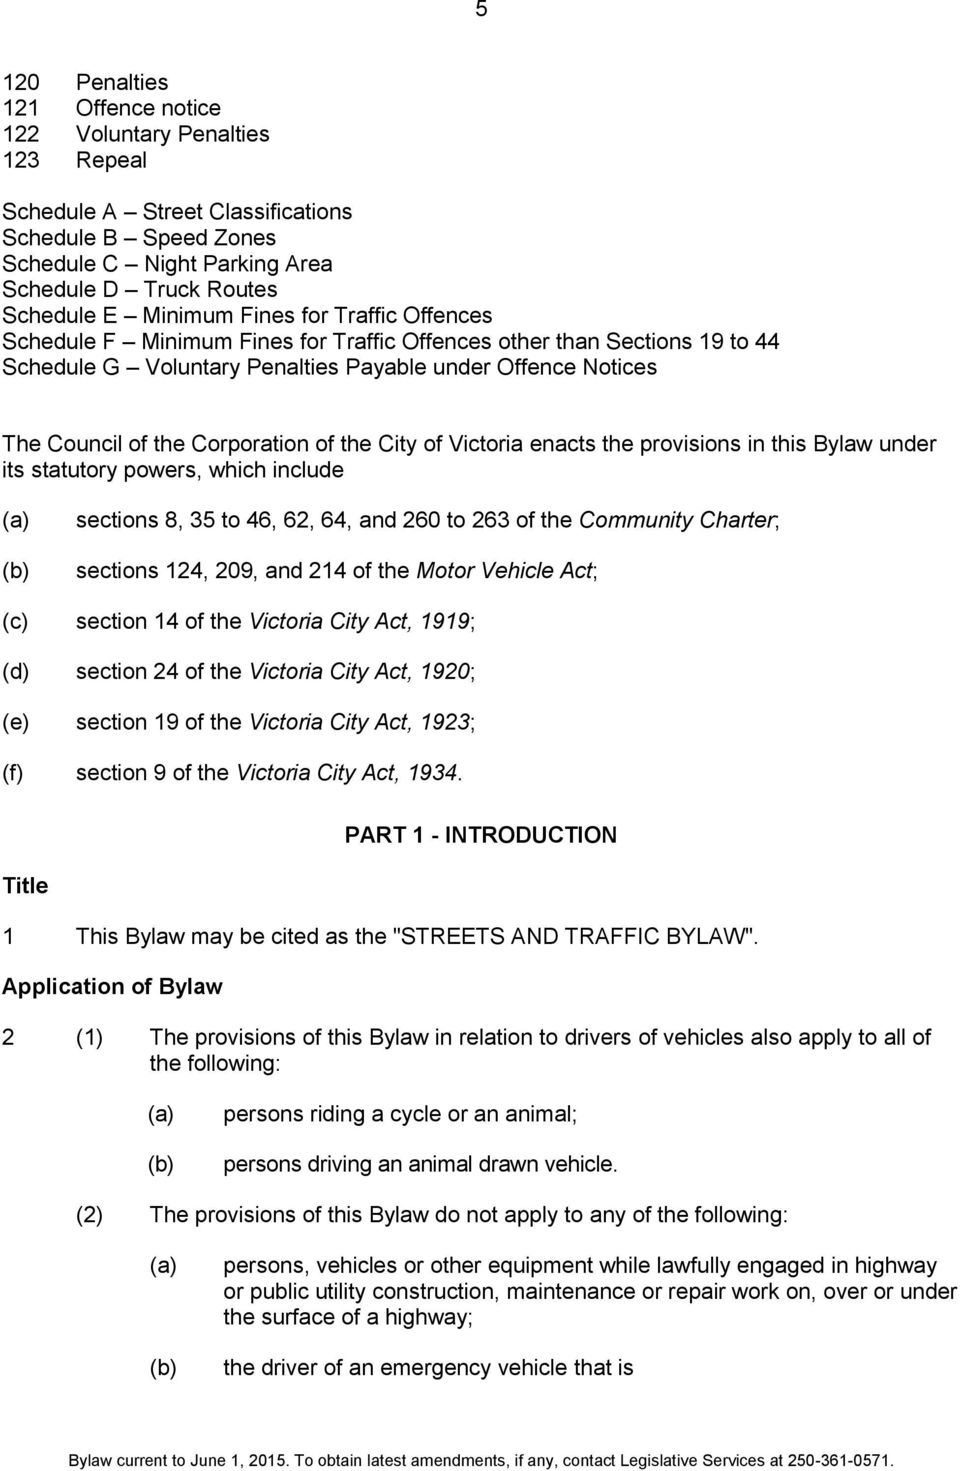 the City of Victoria enacts the provisions in this Bylaw under its statutory powers, which include sections 8, 35 to 46, 62, 64, and 260 to 263 of the Community Charter; sections 124, 209, and 214 of